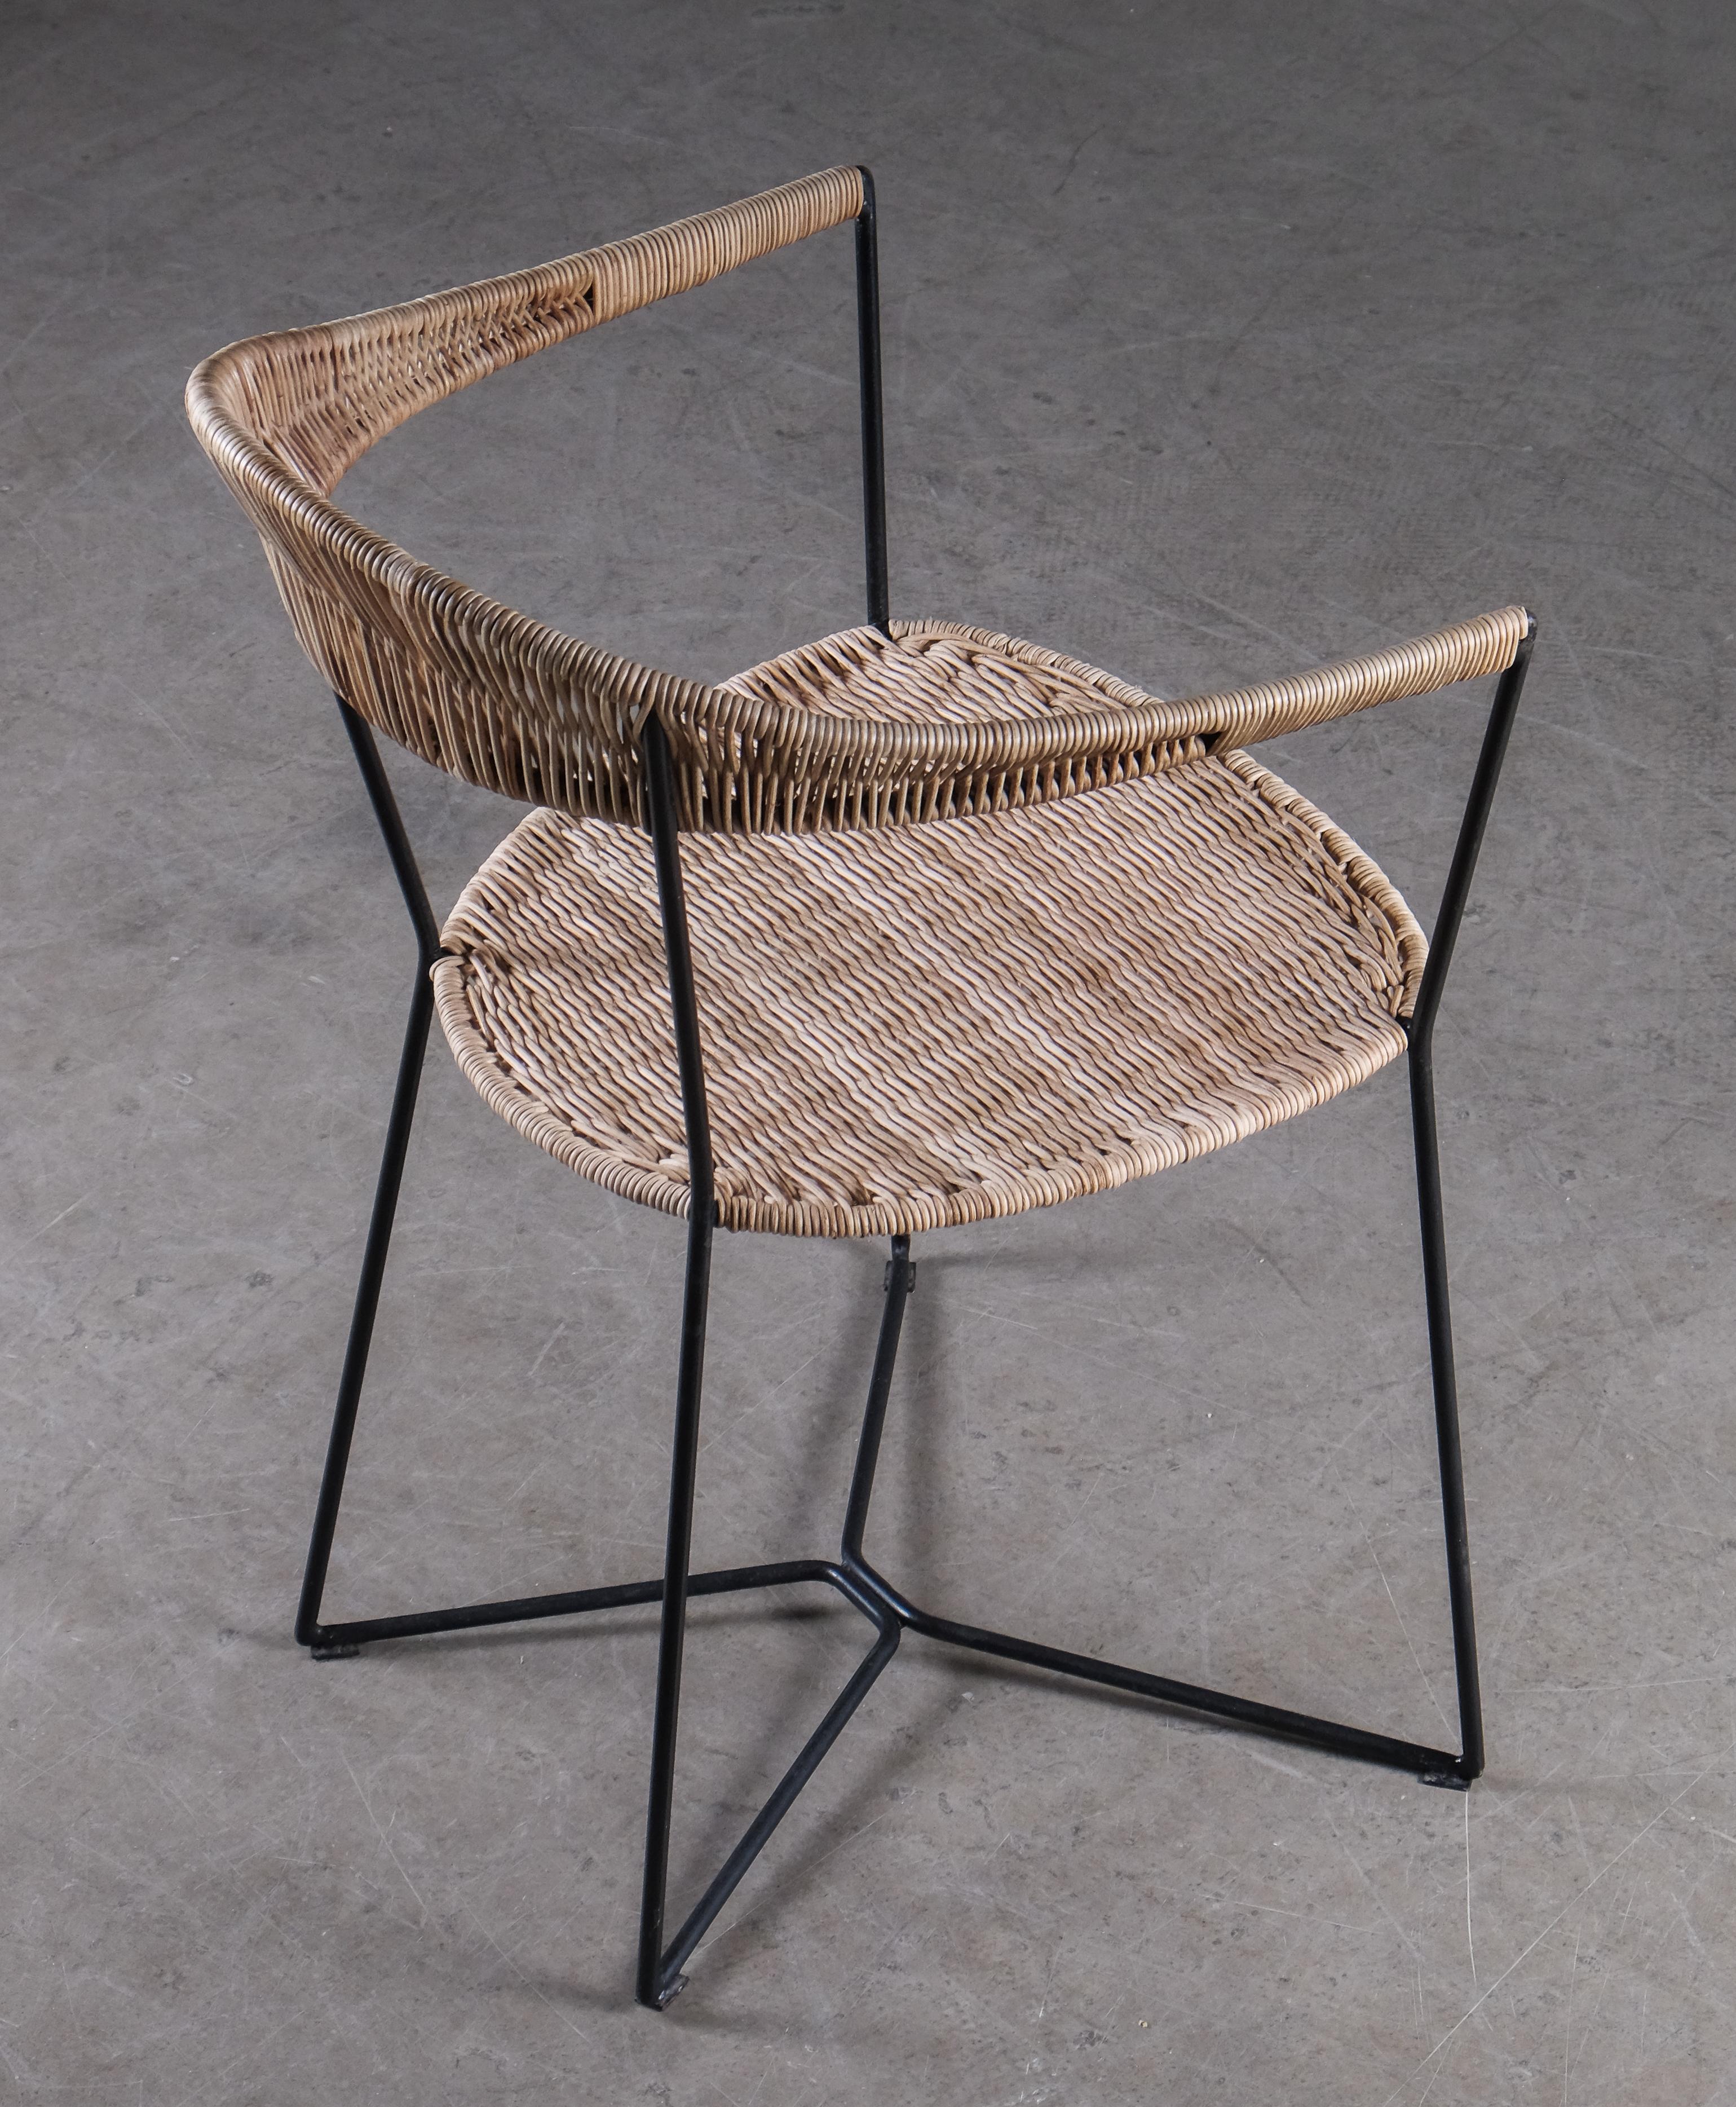 Rare armchair designed by Ivar Callmander, 1920s. Lacquered metal frame and rattan.
Very good condition.